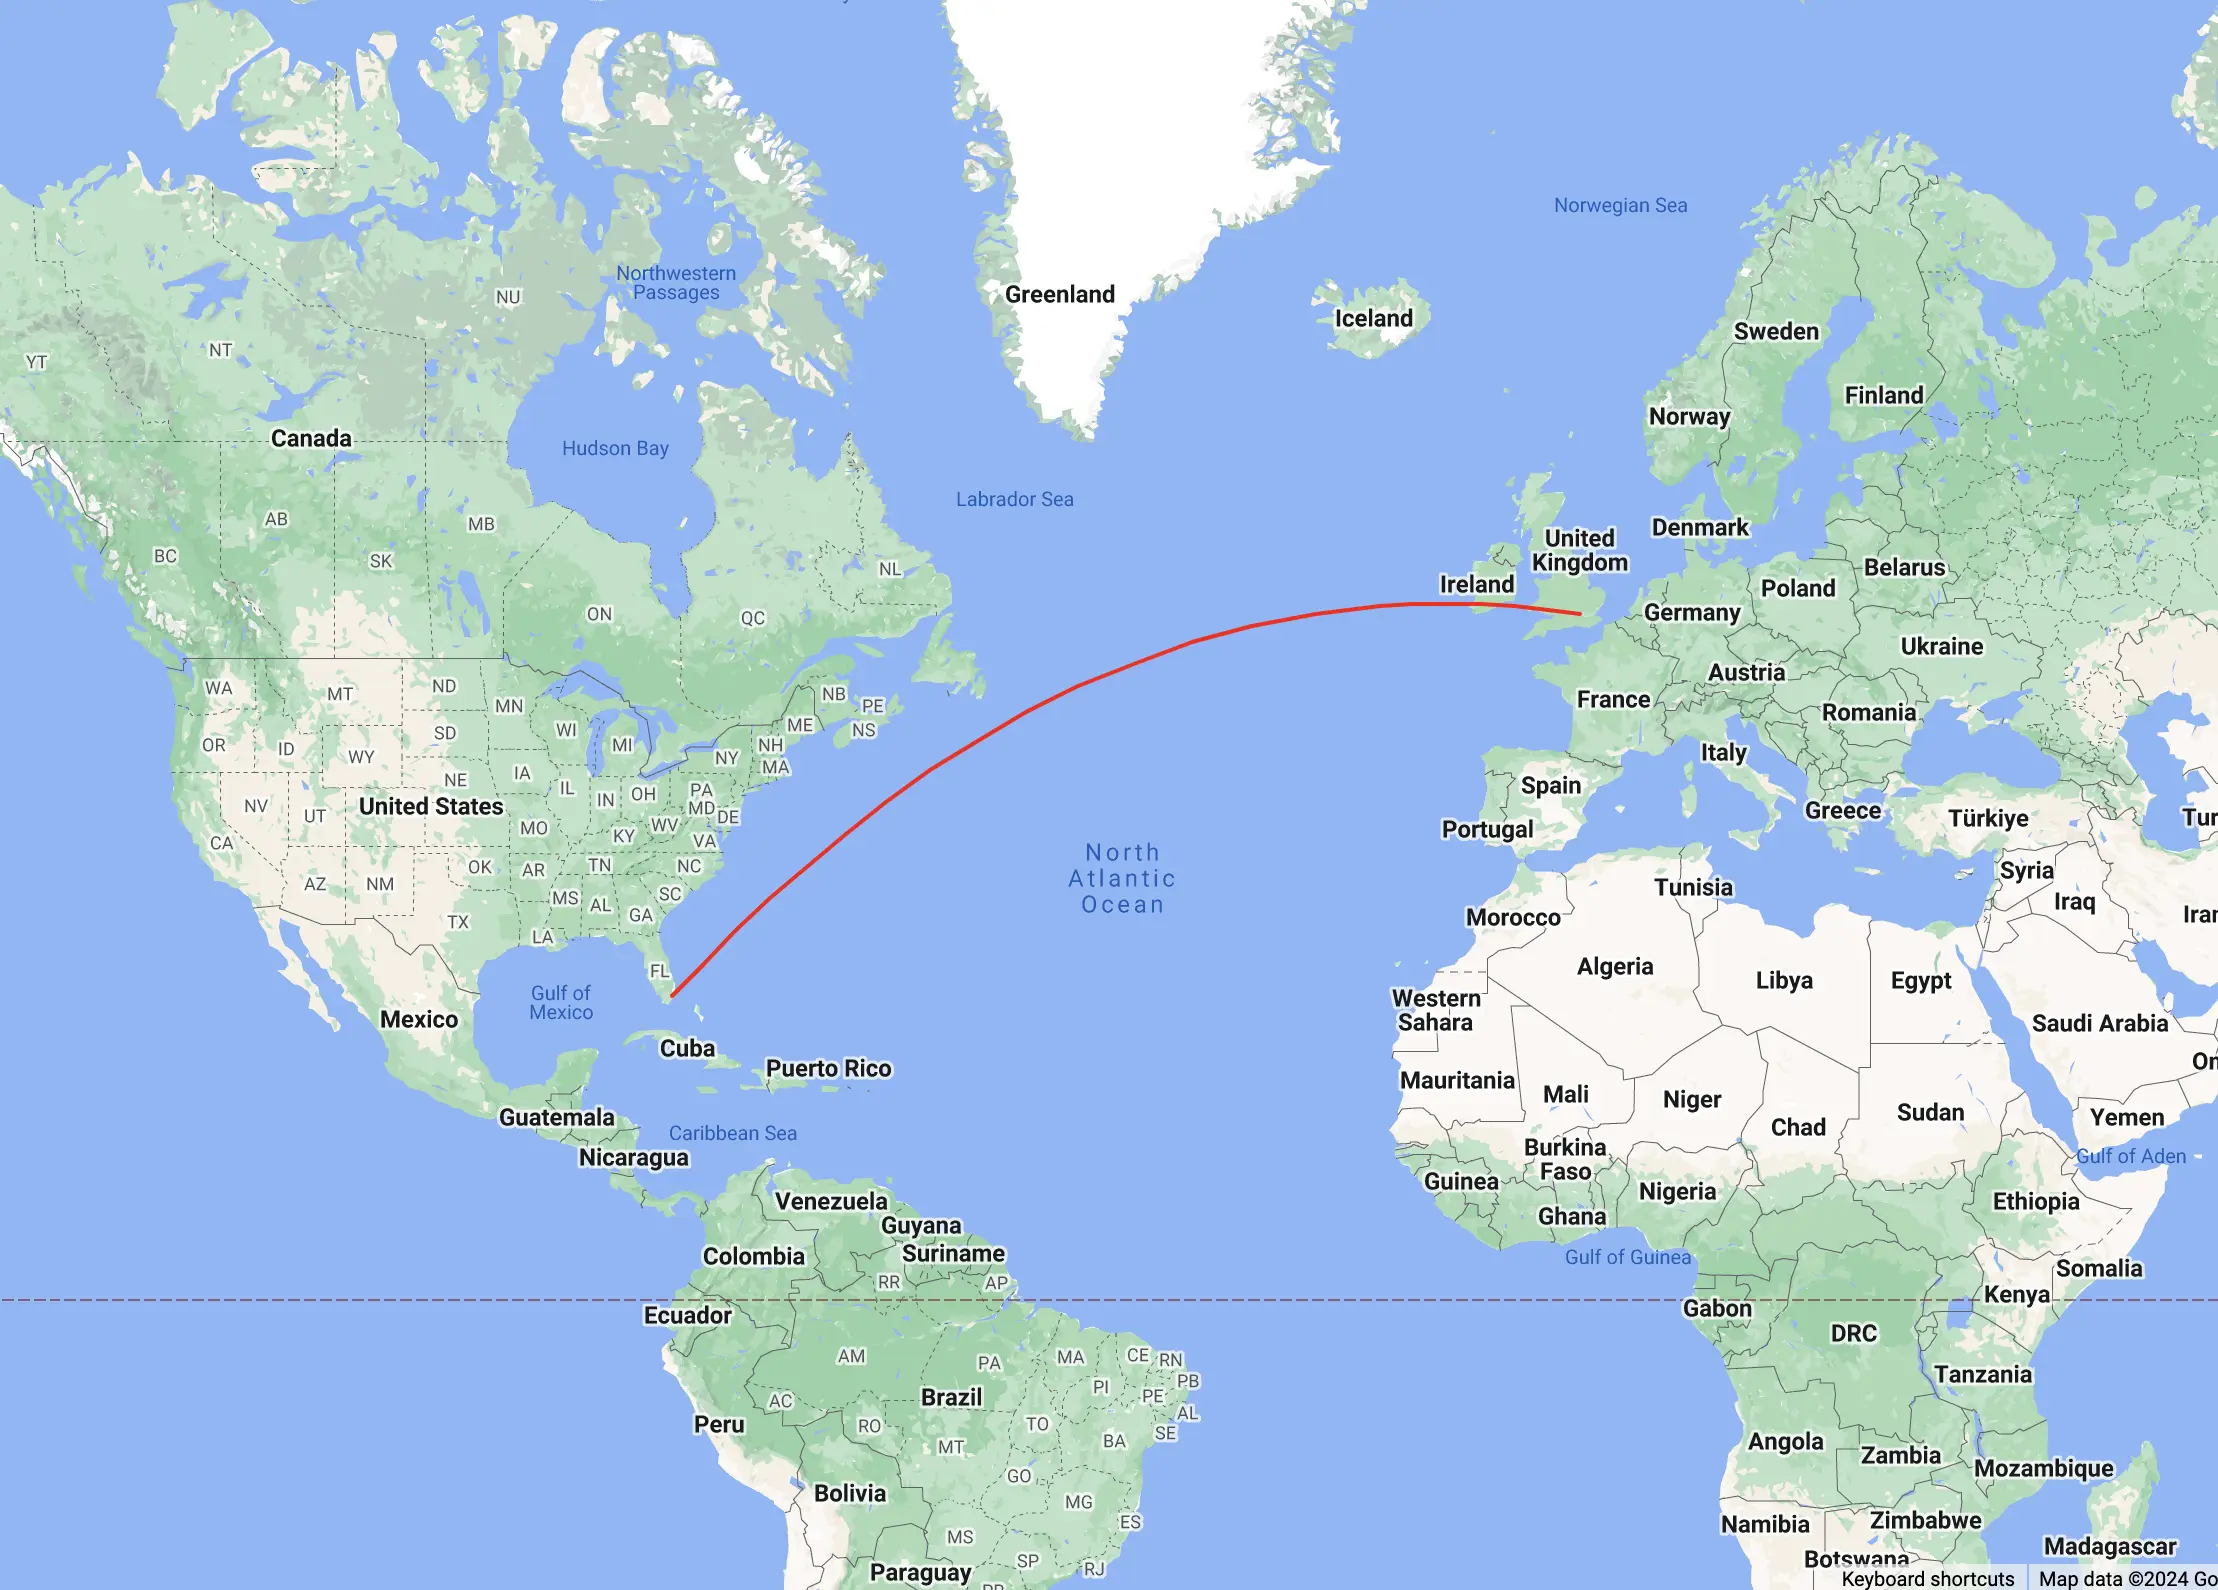 flight route from Miami International Airport to London Heathrow Airport using the Google Maps